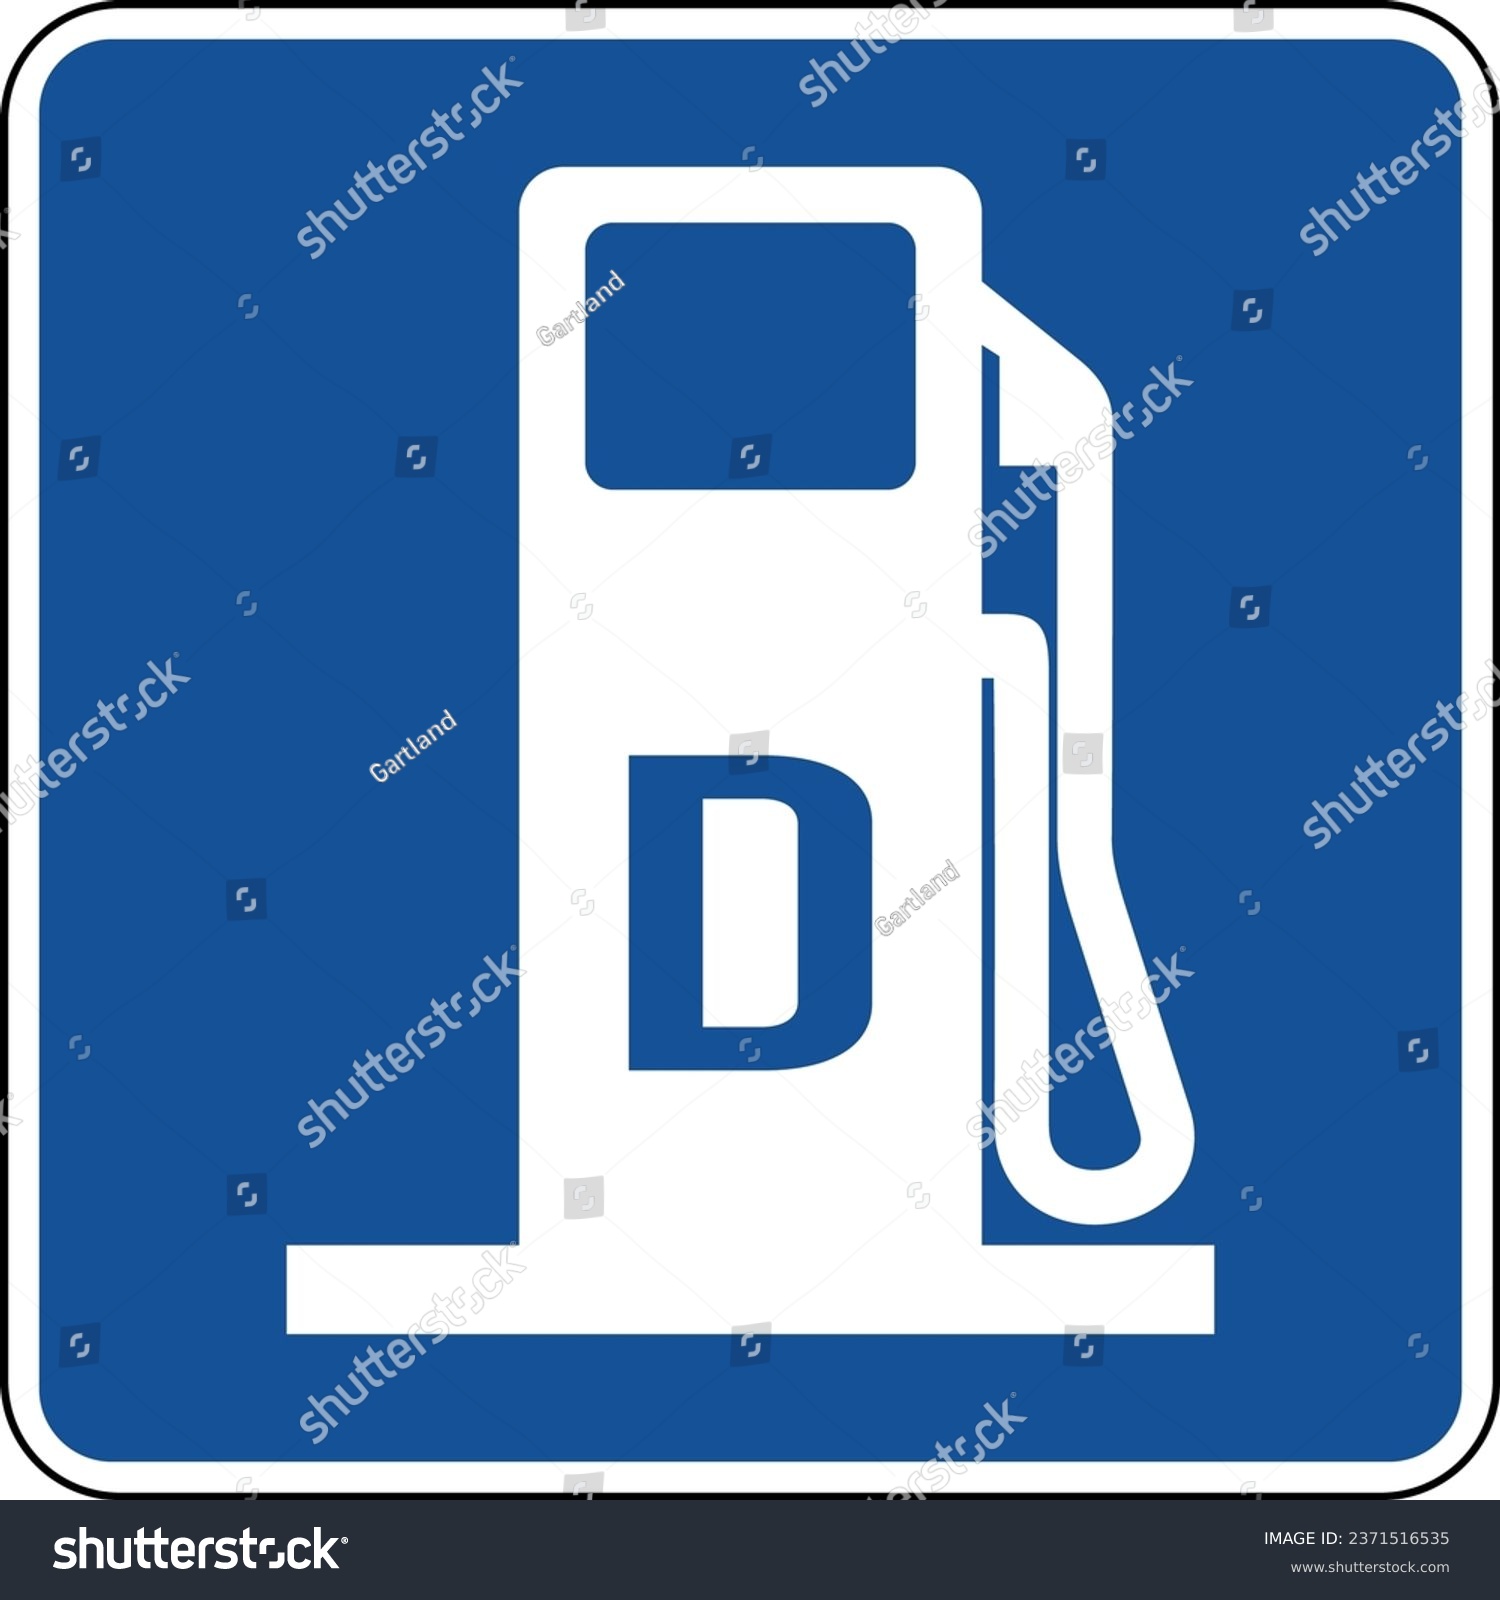 SVG of Vector graphic of a blue usa Alternative Fuel - Diesel mutcd highway sign. It consists of a silhouette of a gas pump with the letter D written on it contained in a blue square svg